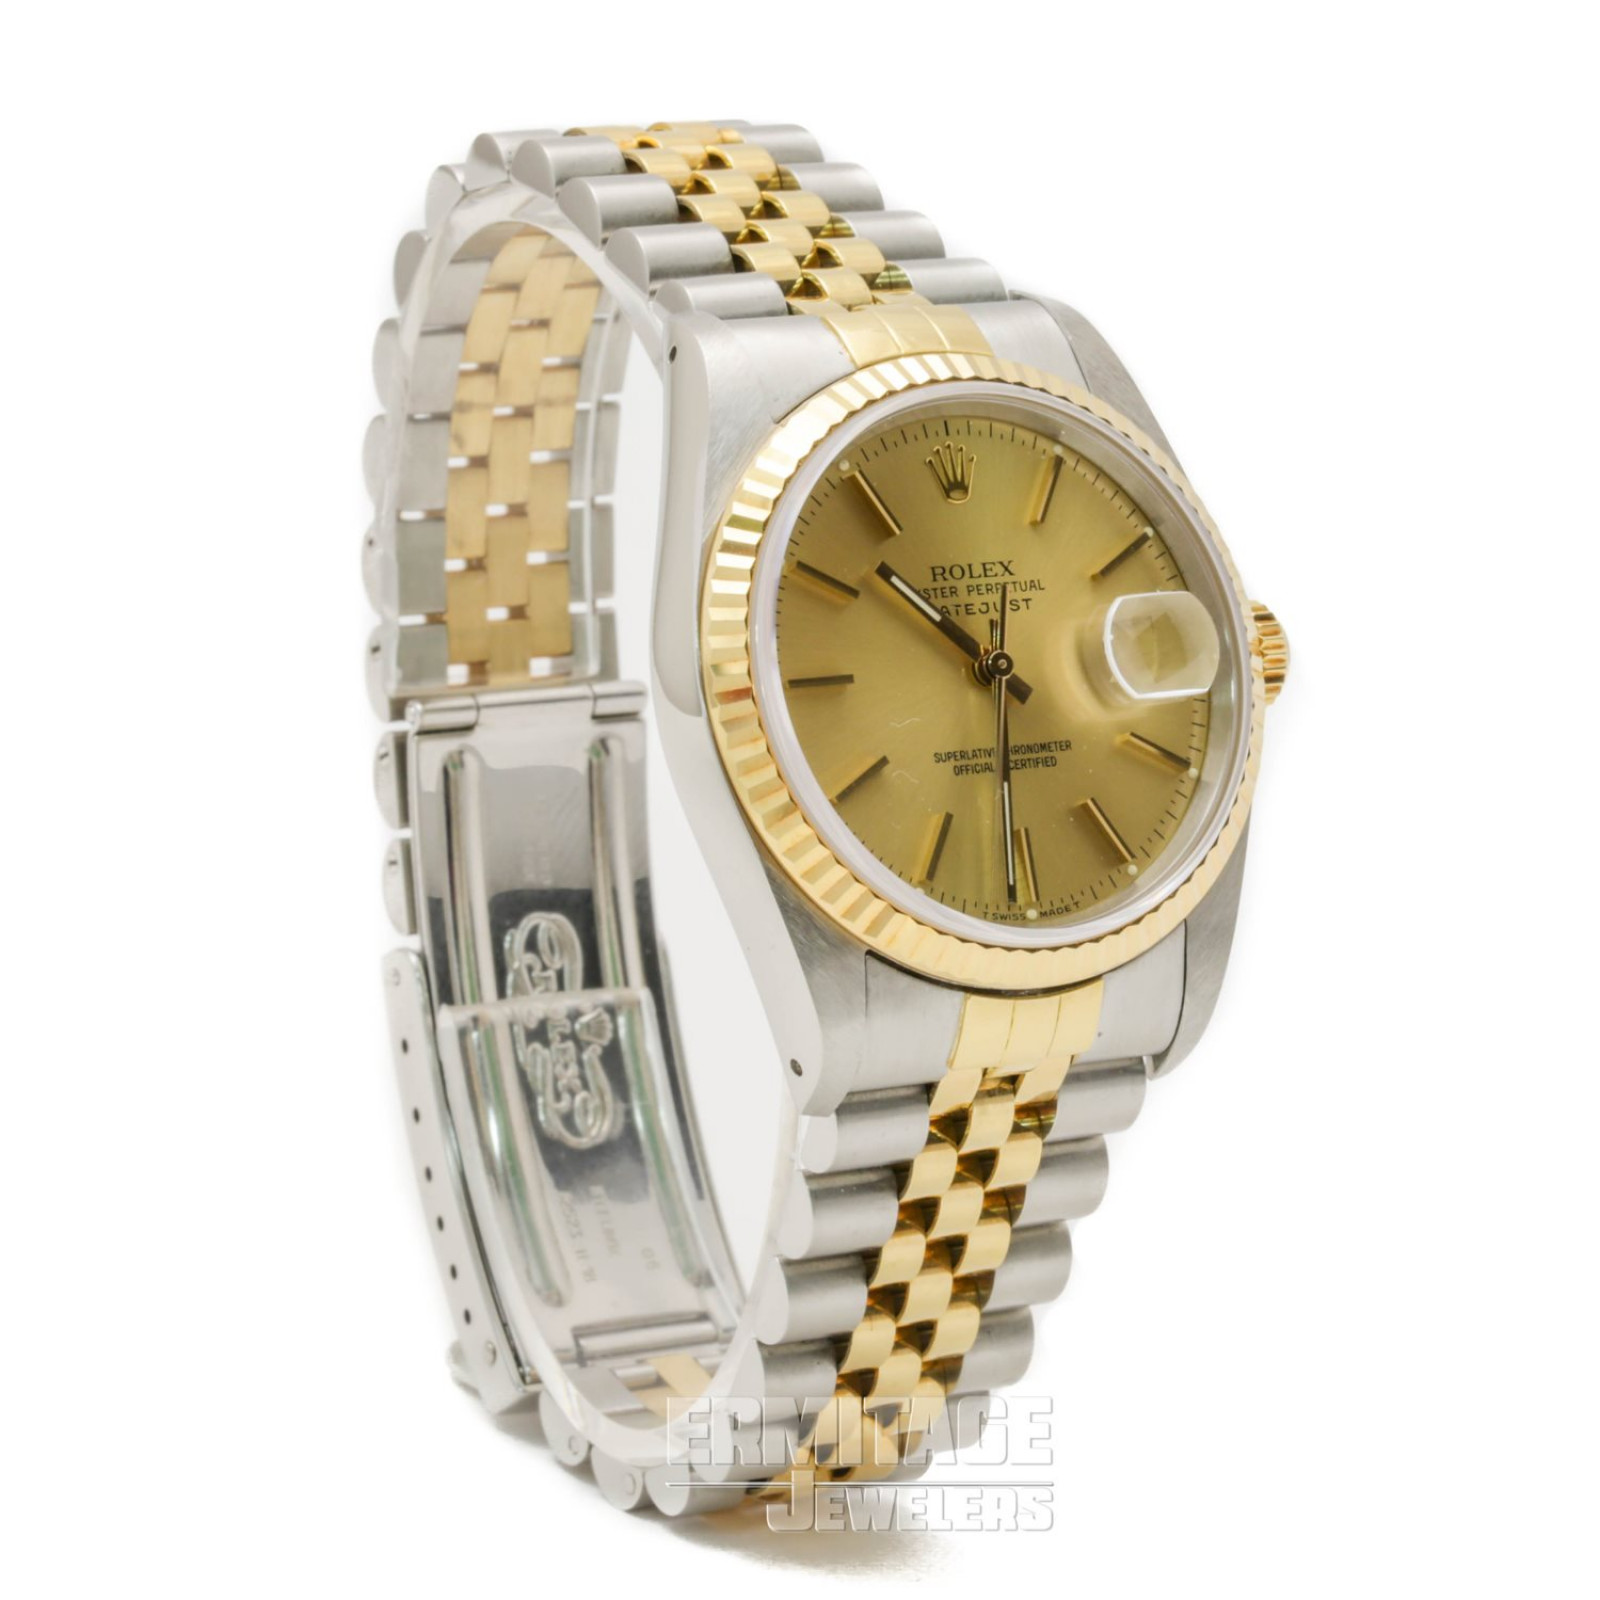 Rolex Datejust 16233 with Champagne Dial